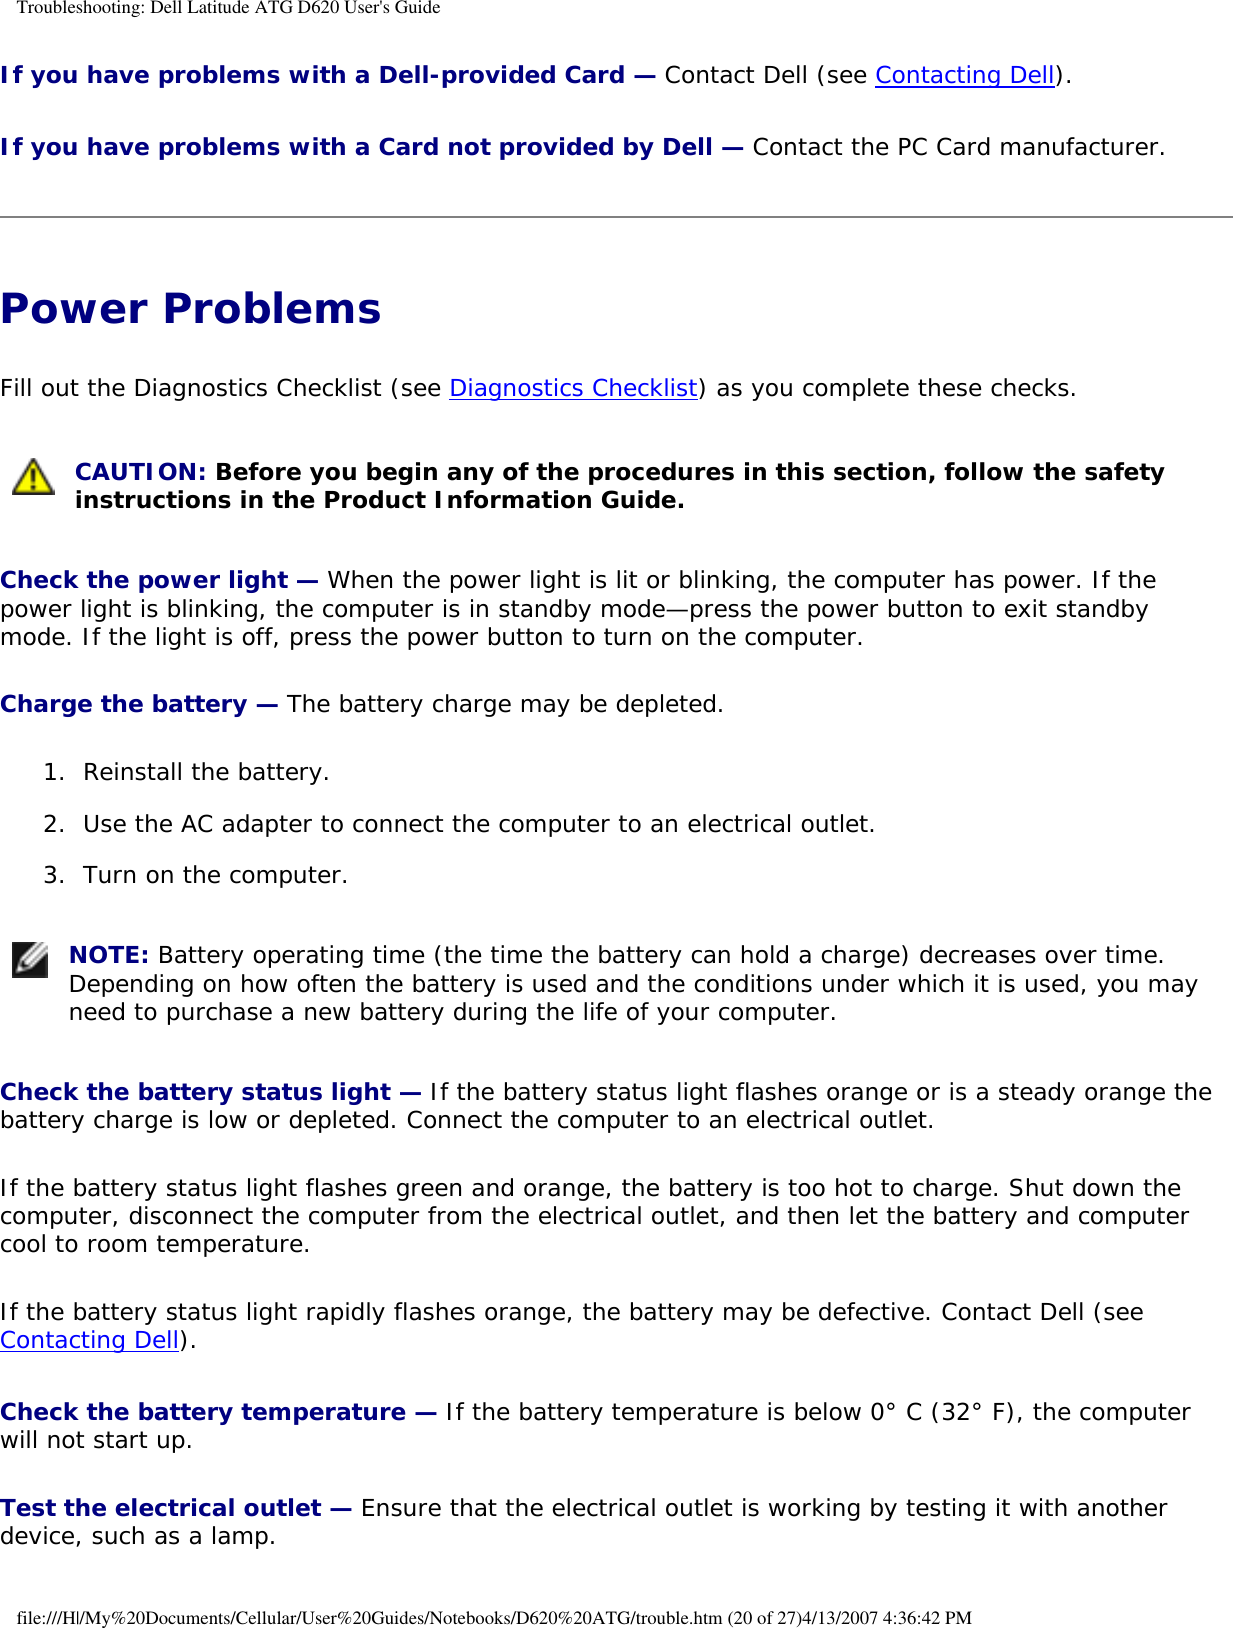 Troubleshooting: Dell Latitude ATG D620 User&apos;s GuideIf you have problems with a Dell-provided Card — Contact Dell (see Contacting Dell).If you have problems with a Card not provided by Dell — Contact the PC Card manufacturer.Power Problems Fill out the Diagnostics Checklist (see Diagnostics Checklist) as you complete these checks. CAUTION: Before you begin any of the procedures in this section, follow the safety instructions in the Product Information Guide. Check the power light — When the power light is lit or blinking, the computer has power. If the power light is blinking, the computer is in standby mode—press the power button to exit standby mode. If the light is off, press the power button to turn on the computer.Charge the battery — The battery charge may be depleted.1.  Reinstall the battery.   2.  Use the AC adapter to connect the computer to an electrical outlet.   3.  Turn on the computer.    NOTE: Battery operating time (the time the battery can hold a charge) decreases over time. Depending on how often the battery is used and the conditions under which it is used, you may need to purchase a new battery during the life of your computer. Check the battery status light — If the battery status light flashes orange or is a steady orange the battery charge is low or depleted. Connect the computer to an electrical outlet.If the battery status light flashes green and orange, the battery is too hot to charge. Shut down the computer, disconnect the computer from the electrical outlet, and then let the battery and computer cool to room temperature.If the battery status light rapidly flashes orange, the battery may be defective. Contact Dell (see Contacting Dell).Check the battery temperature — If the battery temperature is below 0° C (32° F), the computer will not start up.Test the electrical outlet — Ensure that the electrical outlet is working by testing it with another device, such as a lamp.file:///H|/My%20Documents/Cellular/User%20Guides/Notebooks/D620%20ATG/trouble.htm (20 of 27)4/13/2007 4:36:42 PM